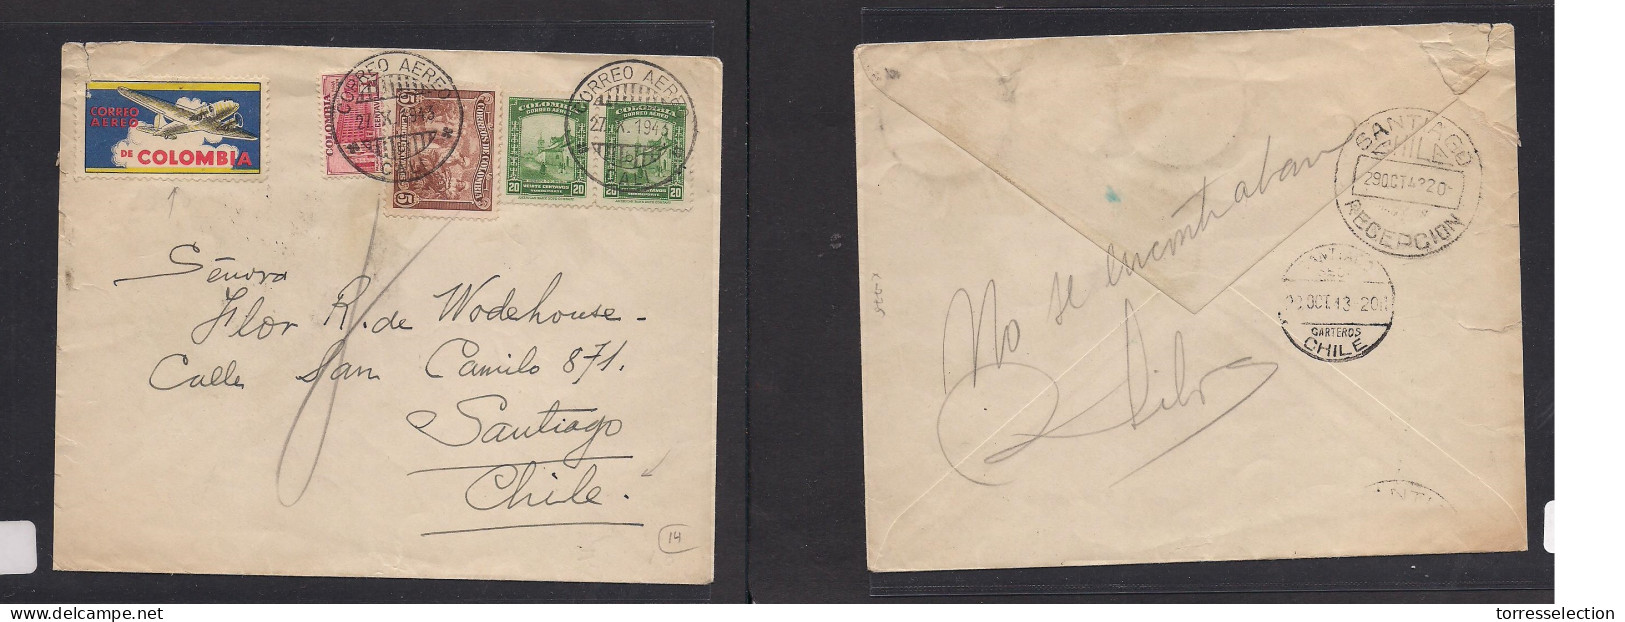 COLOMBIA. Colombia - Cover - 1943 Cali To Chile Air COLOMBIA Mult Fkd Env +color Label, Better Dest Usage. Easy Deal. - Kolumbien